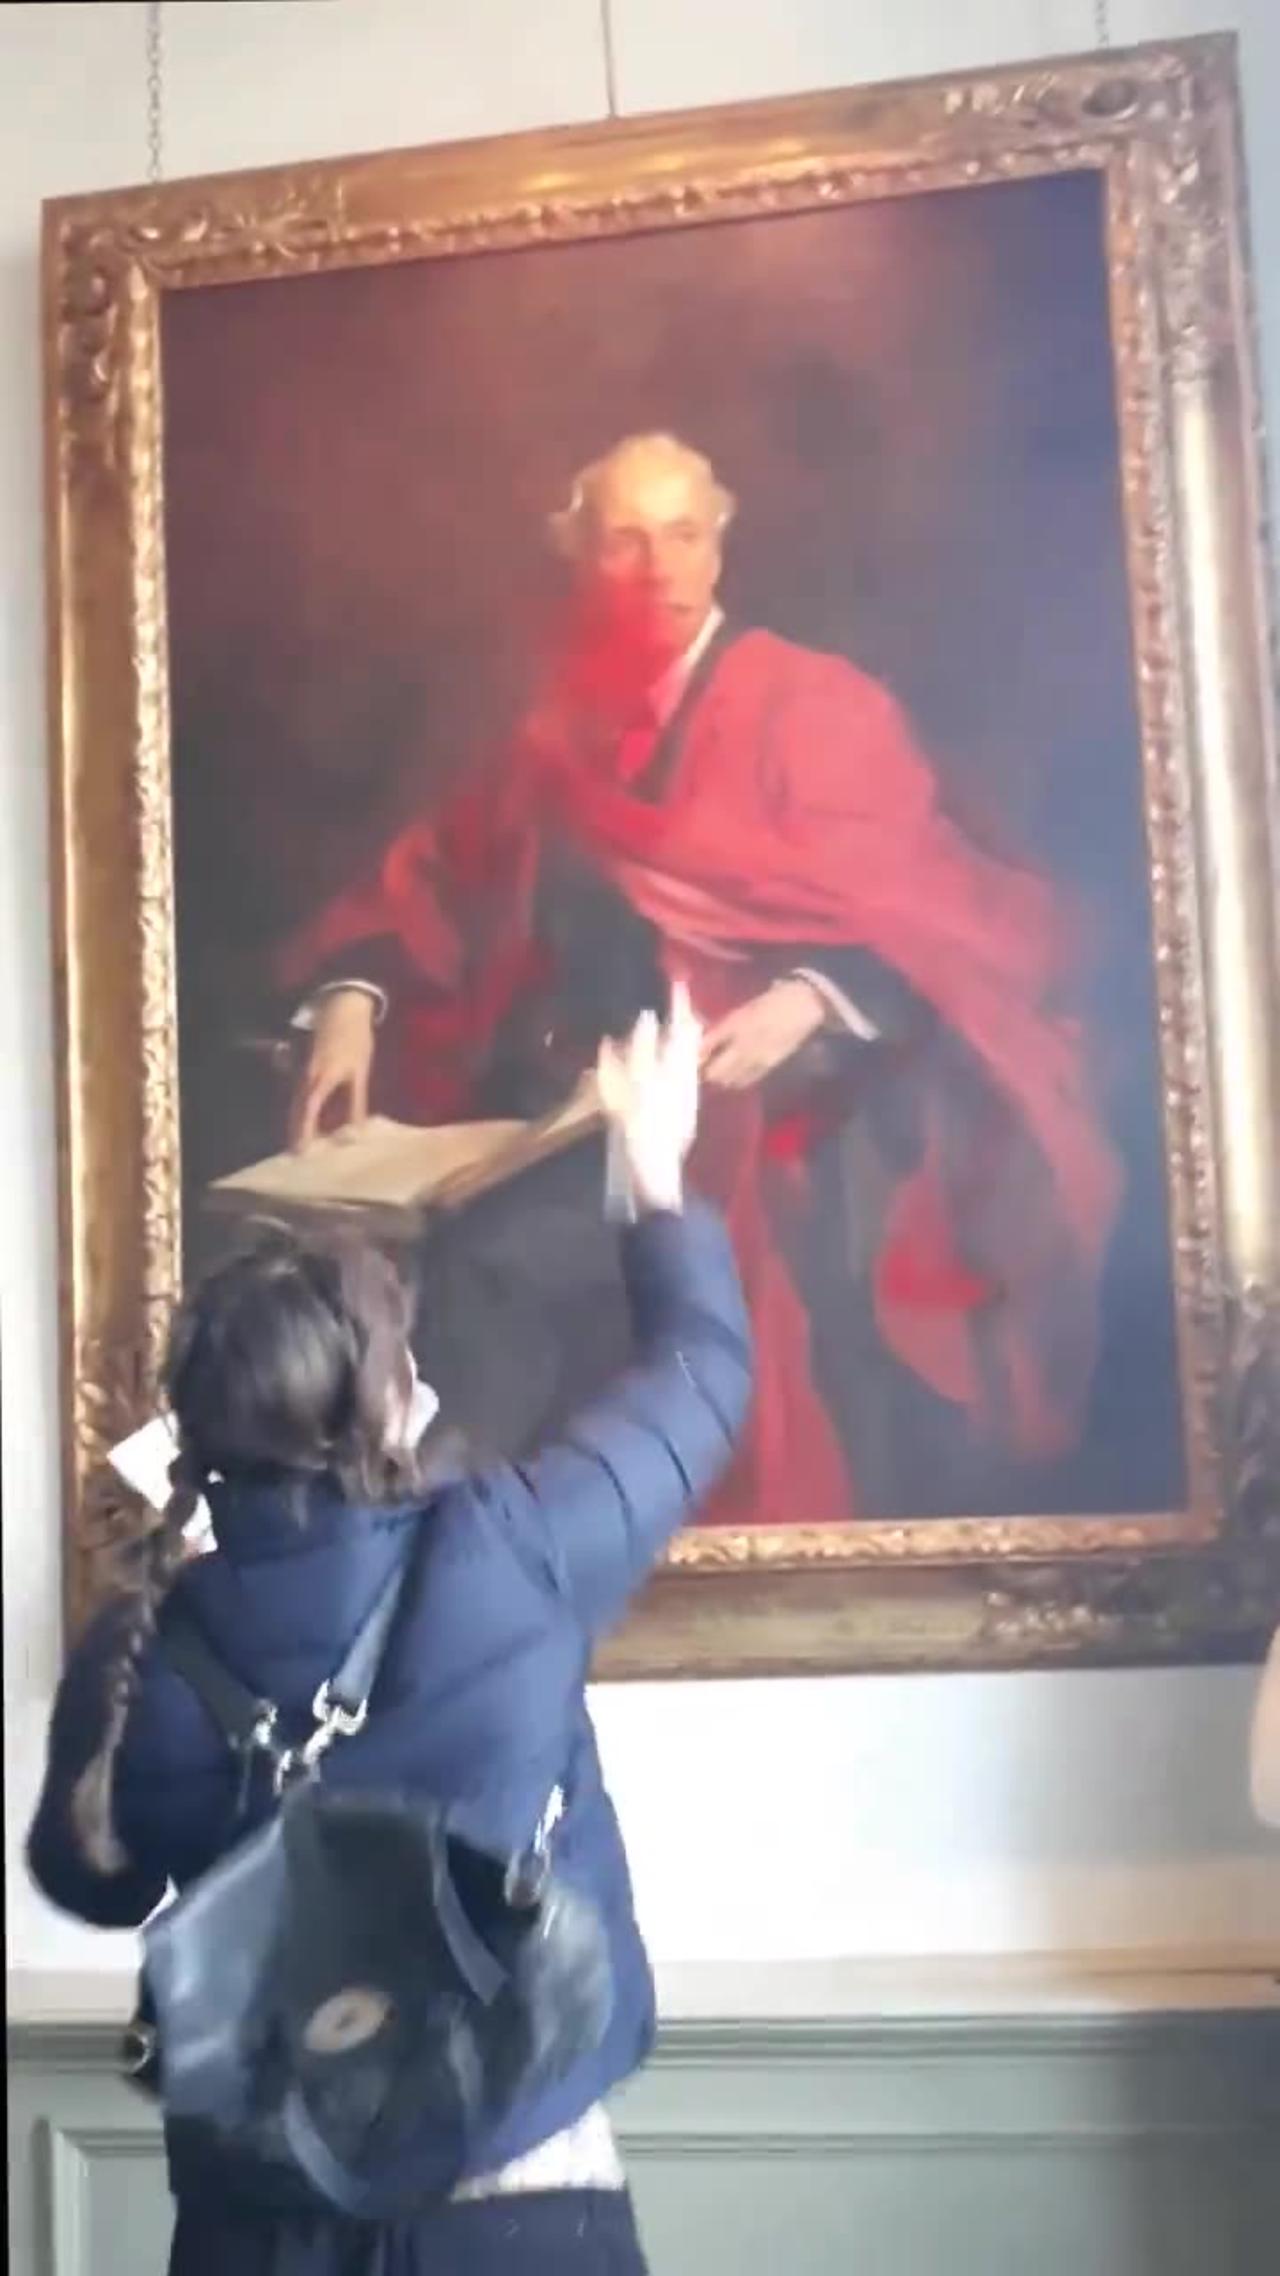 Palestinian Protester Destroys a Painting of Lord Balfour at the University of Cambridge